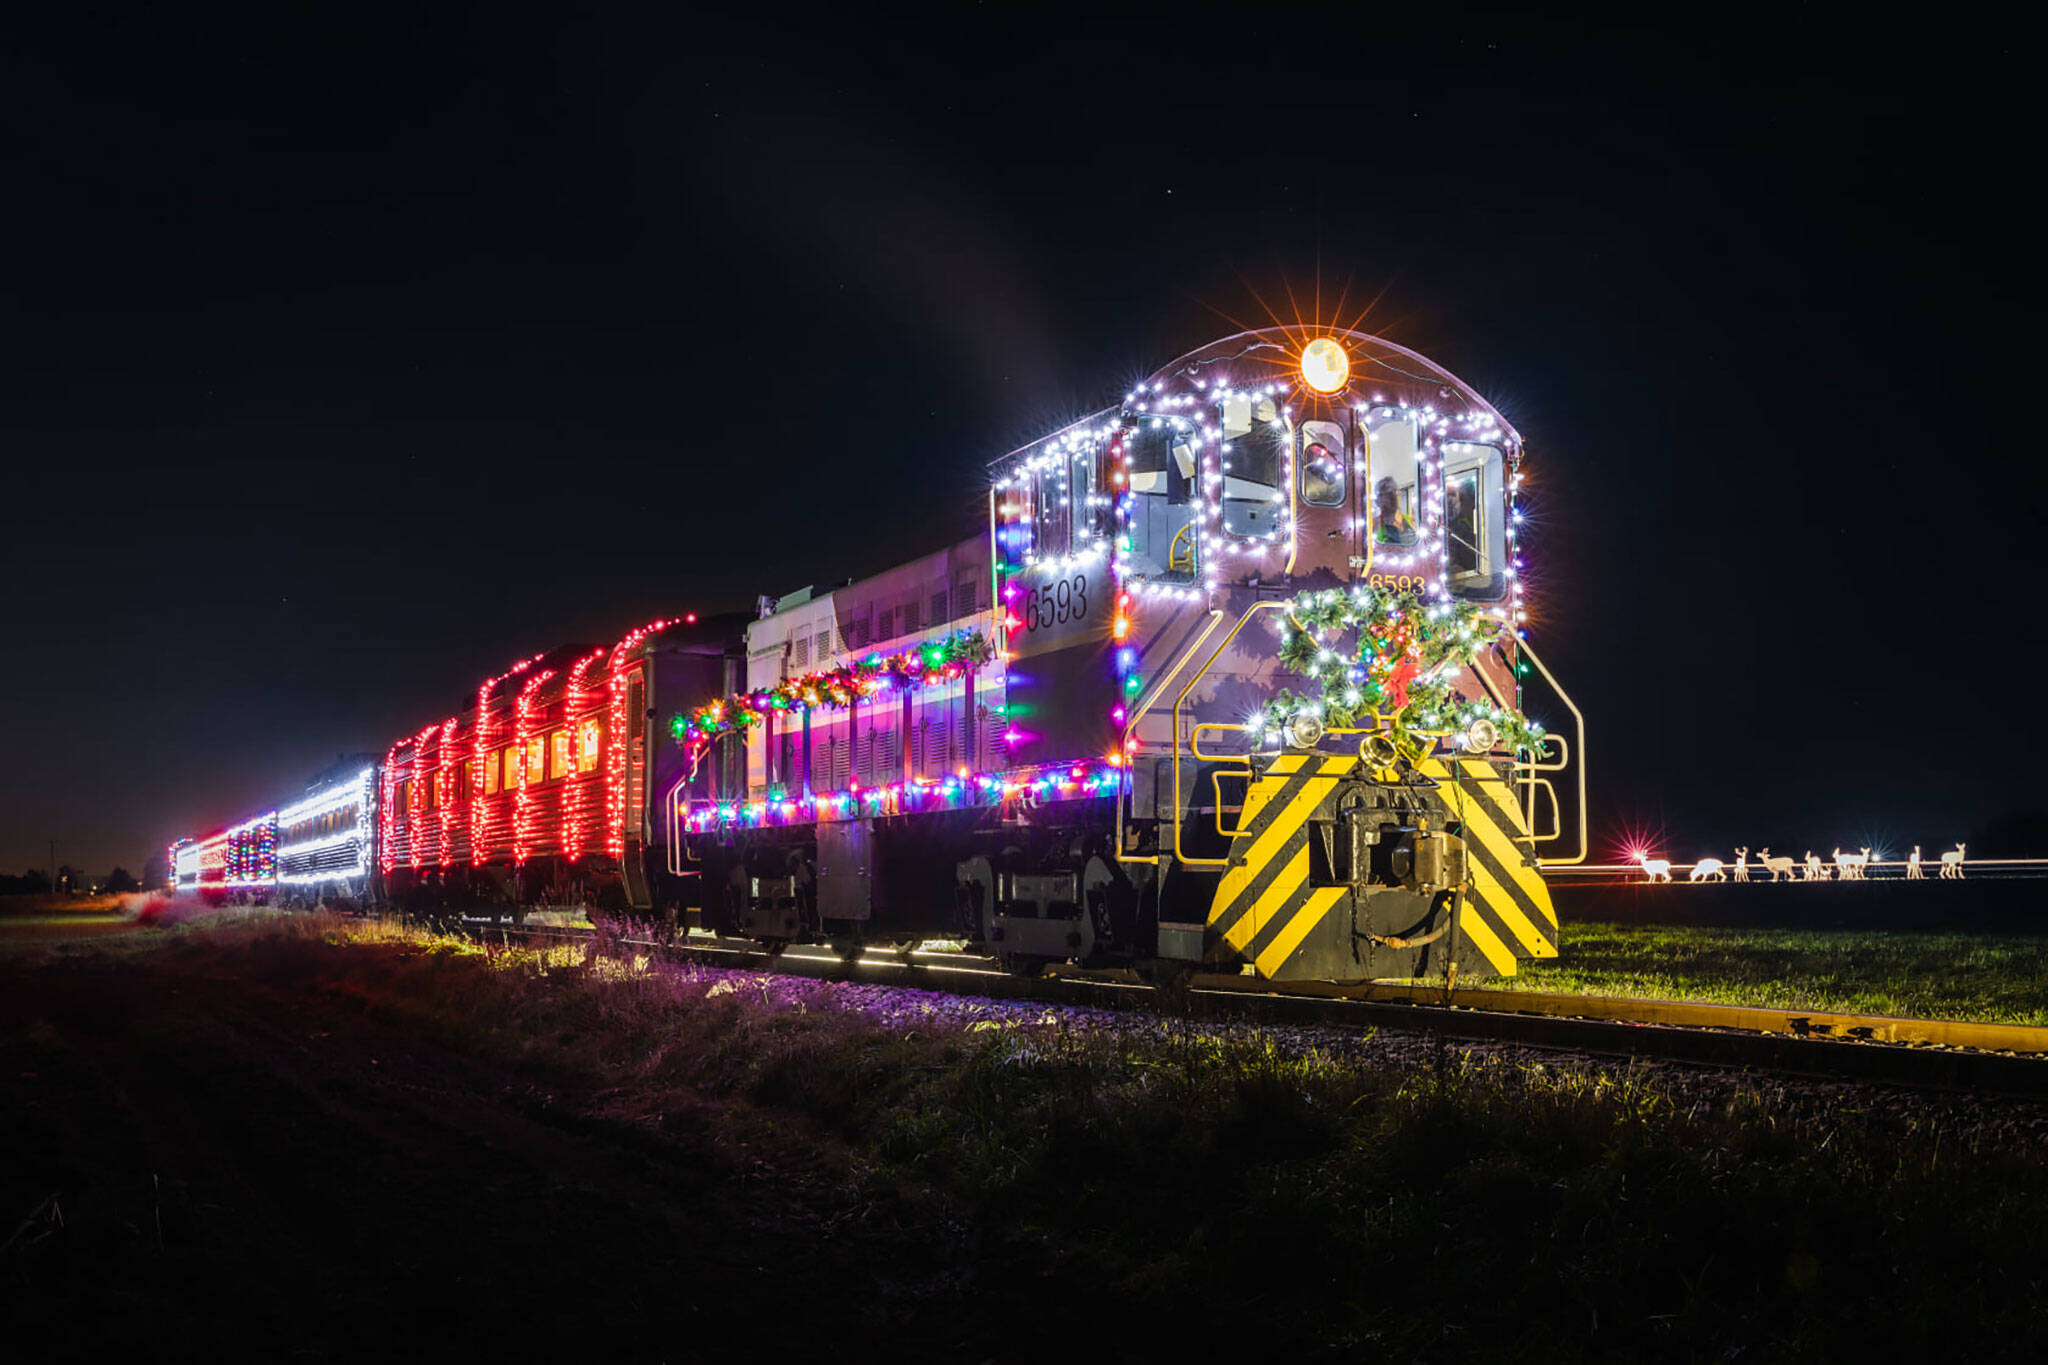 Santa's magical Christmas train is back in Ontario for the holidays